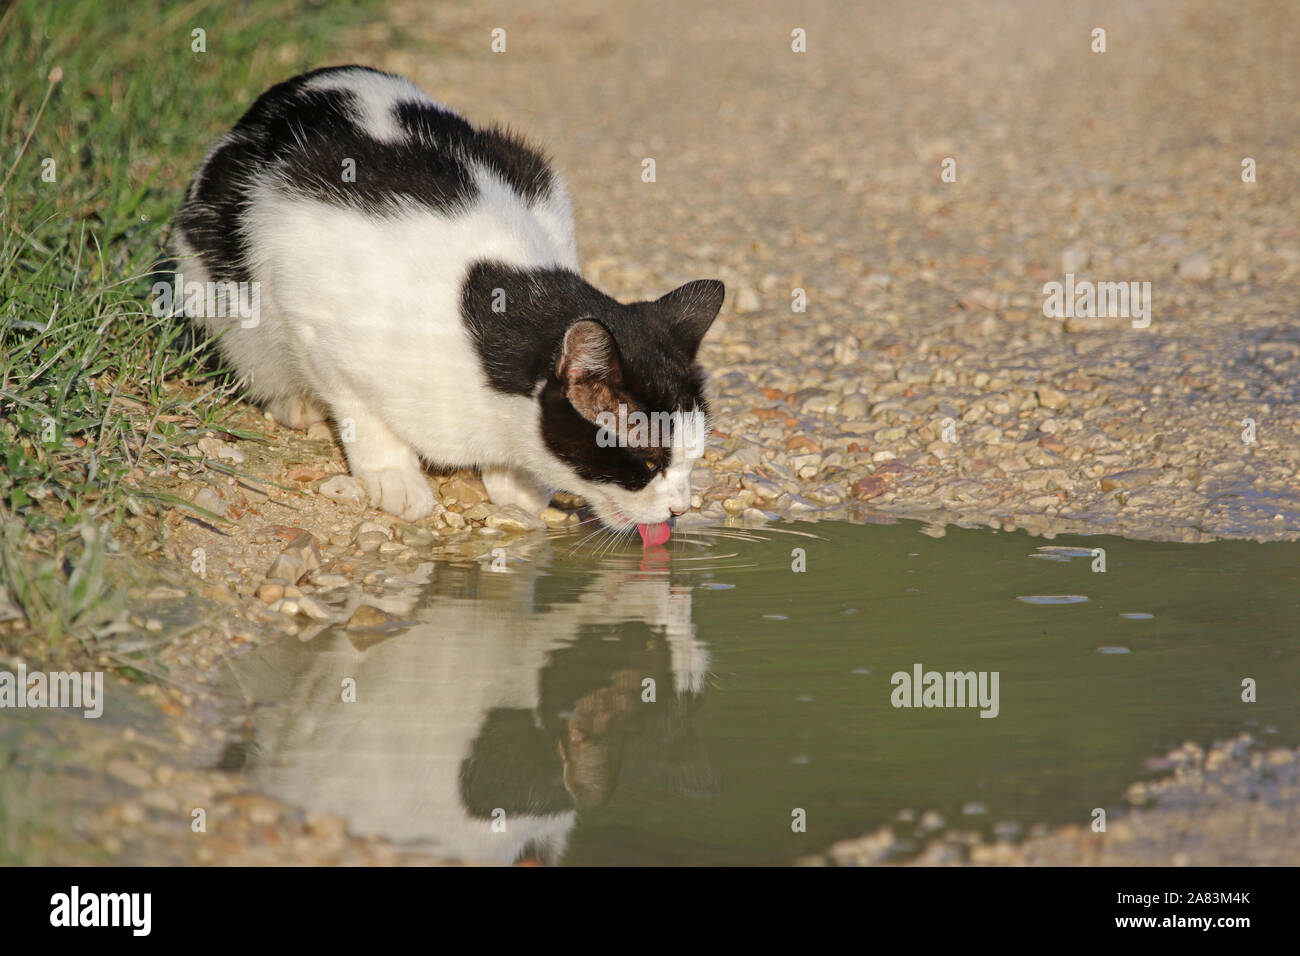 Black and white cat drinking from a puddle a rescue pet symbol of California Colorado Illinois Tennessee abandoned just after Italy's 2016 earthquake Stock Photo